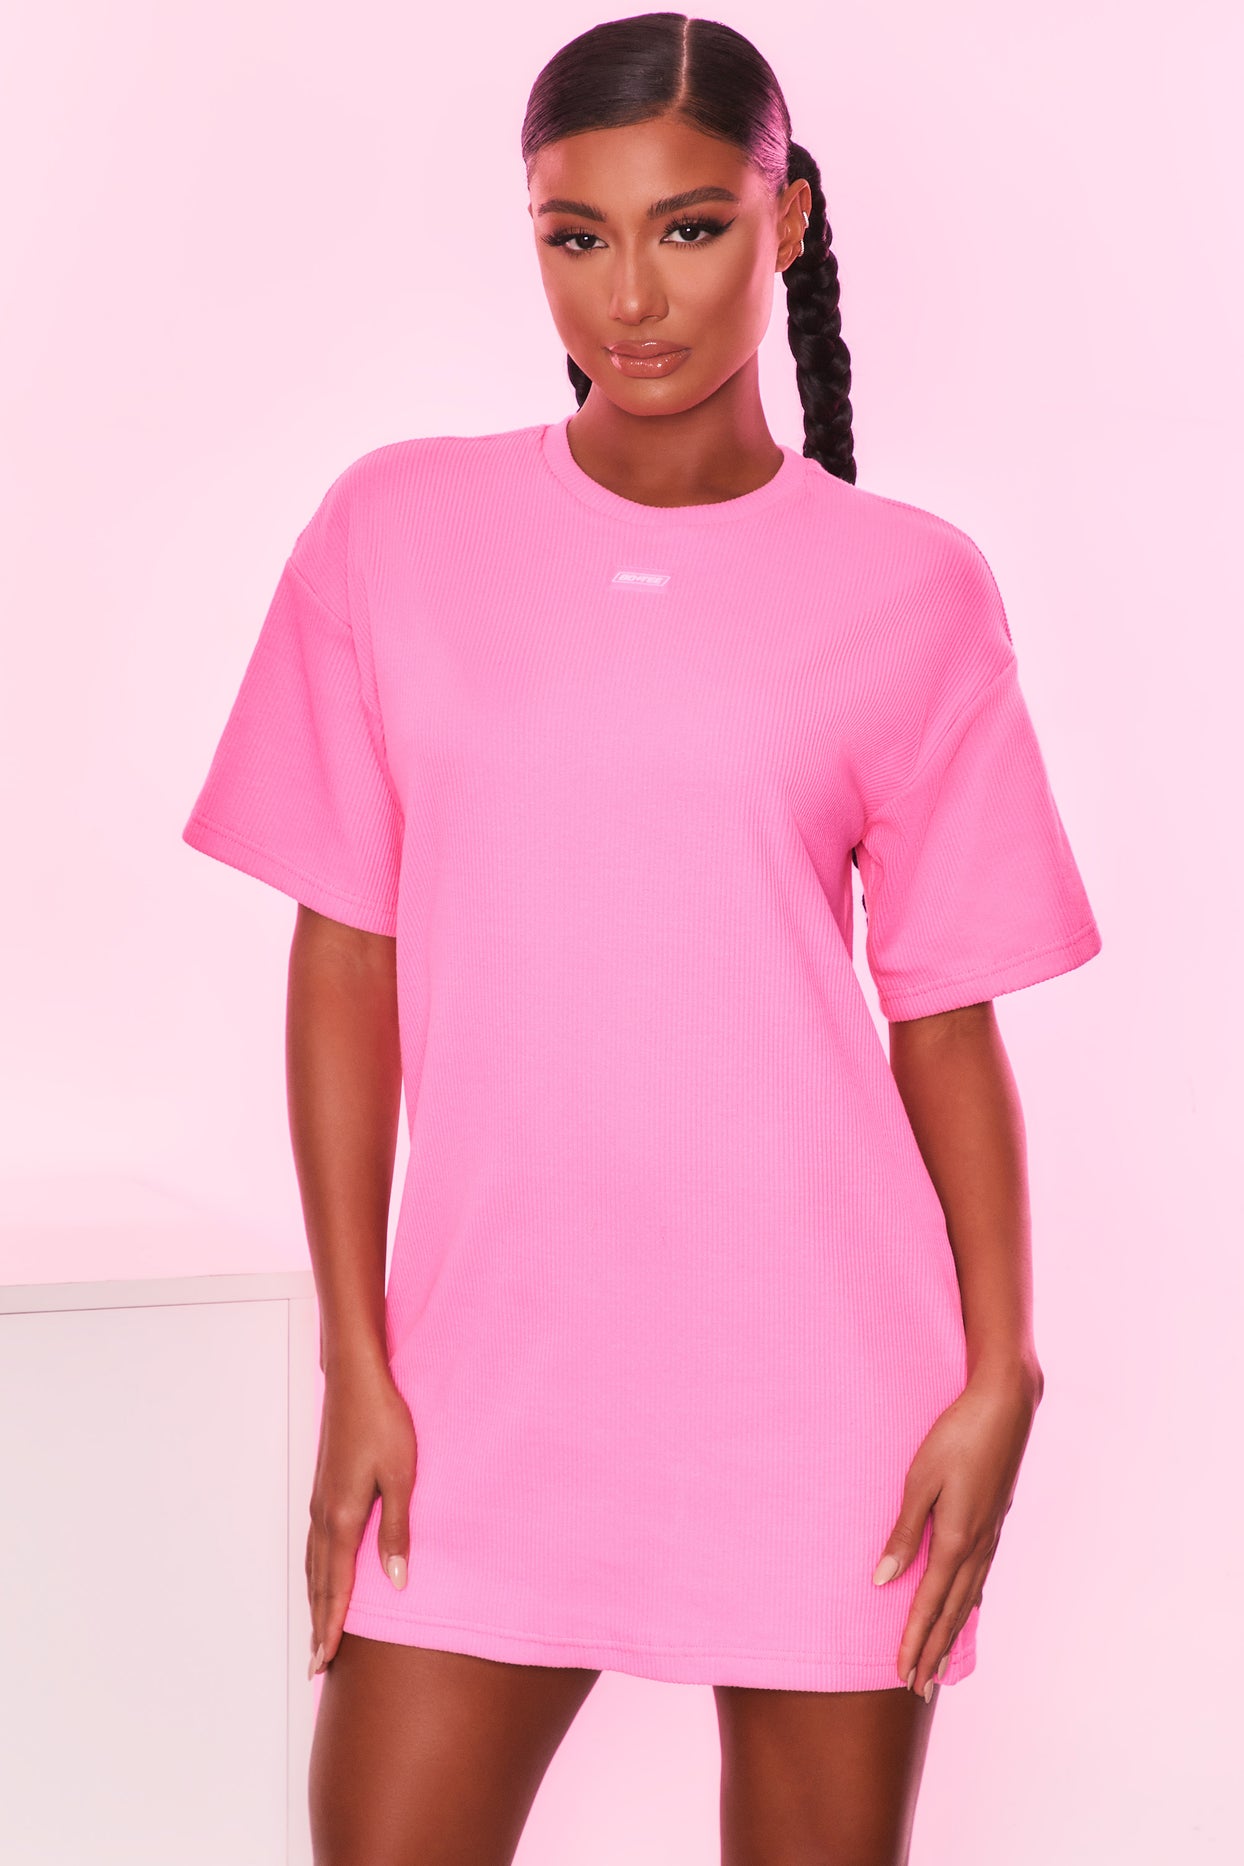 Take It Easy Ribbed Oversized T-Shirt in Candy Pink